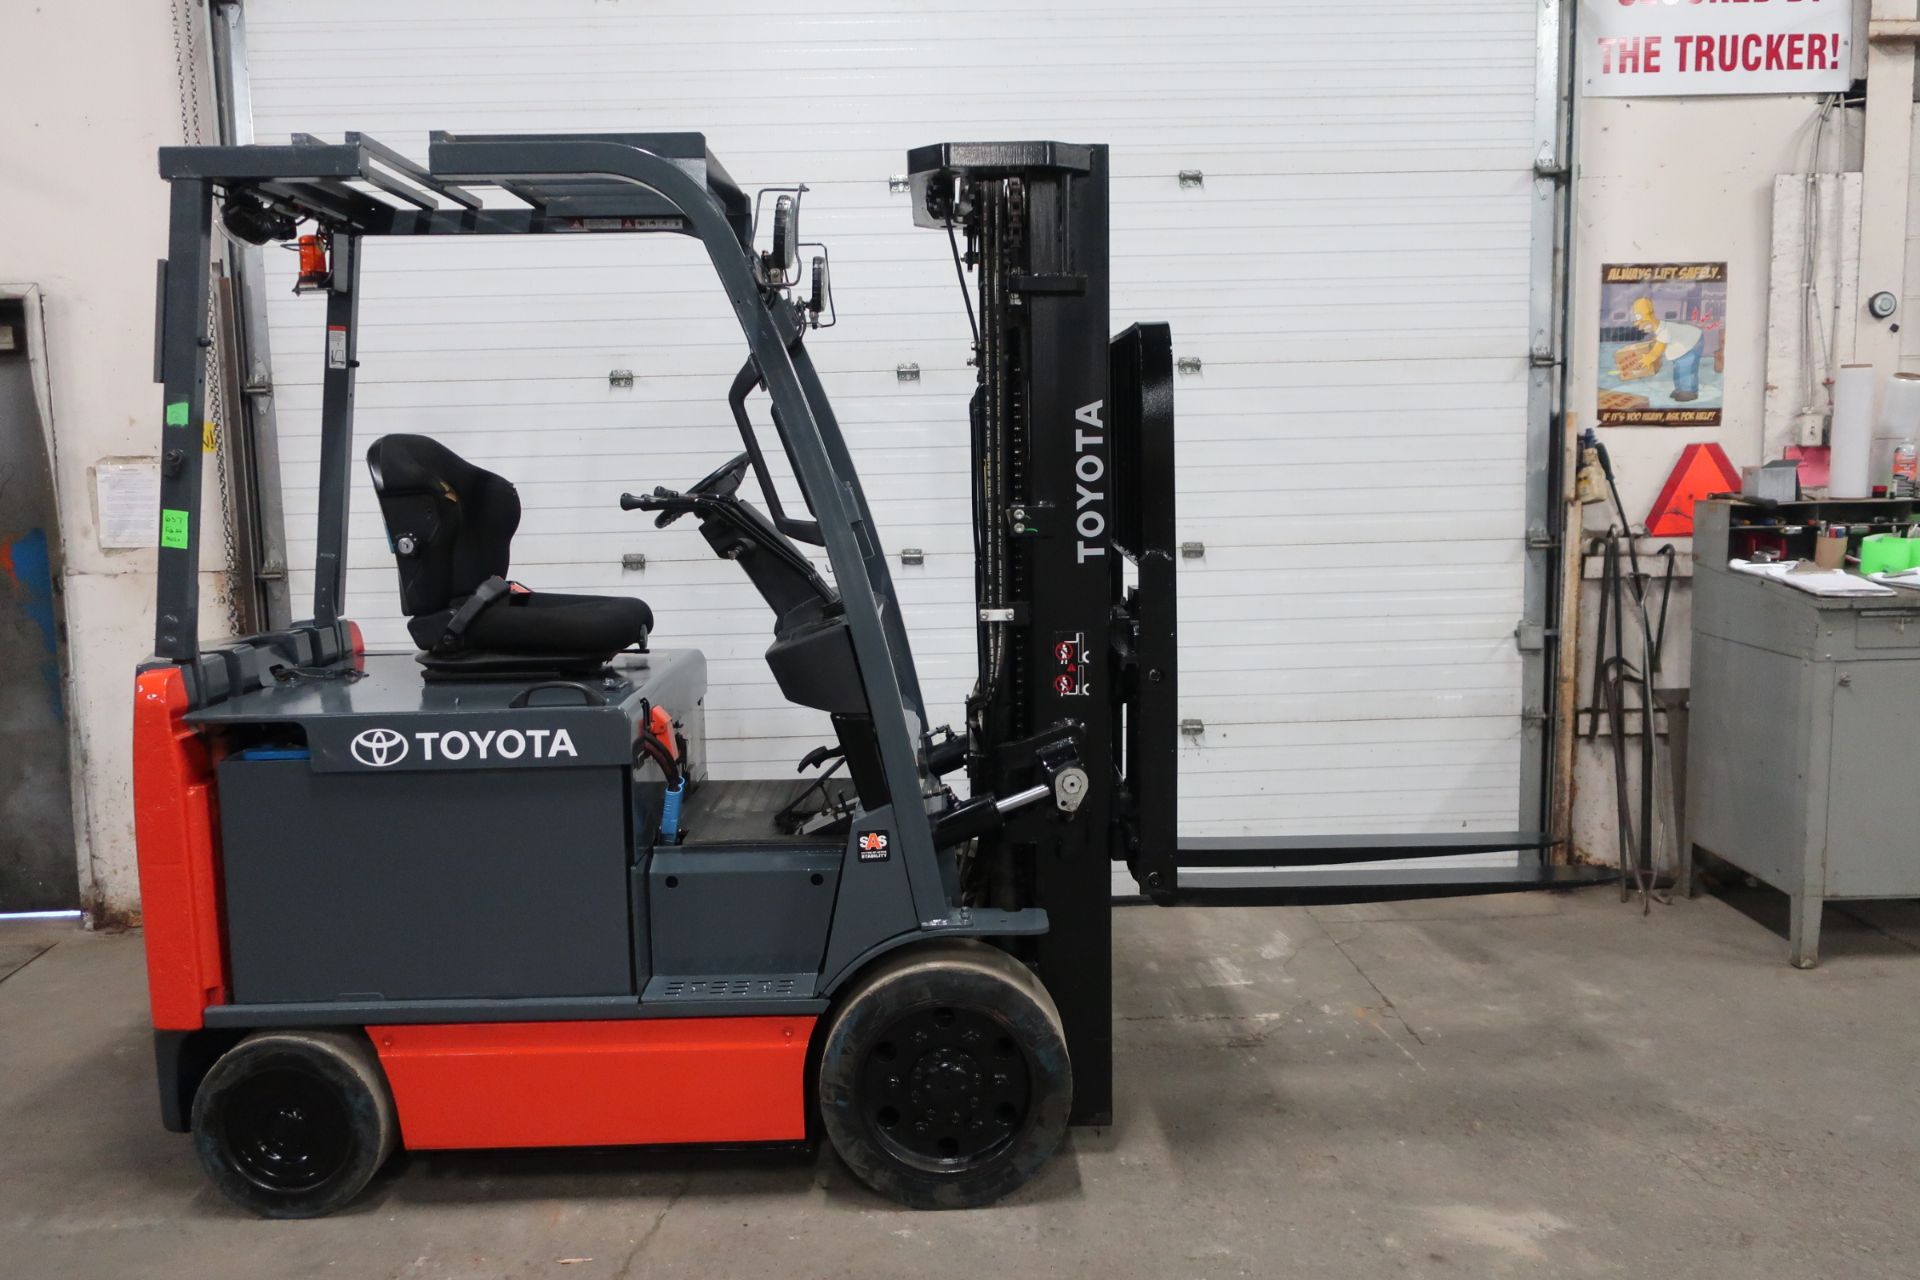 FREE CUSTOMS - 2014 Toyota 6300lbs Electric Forklift with sideshift and 3-stage mast